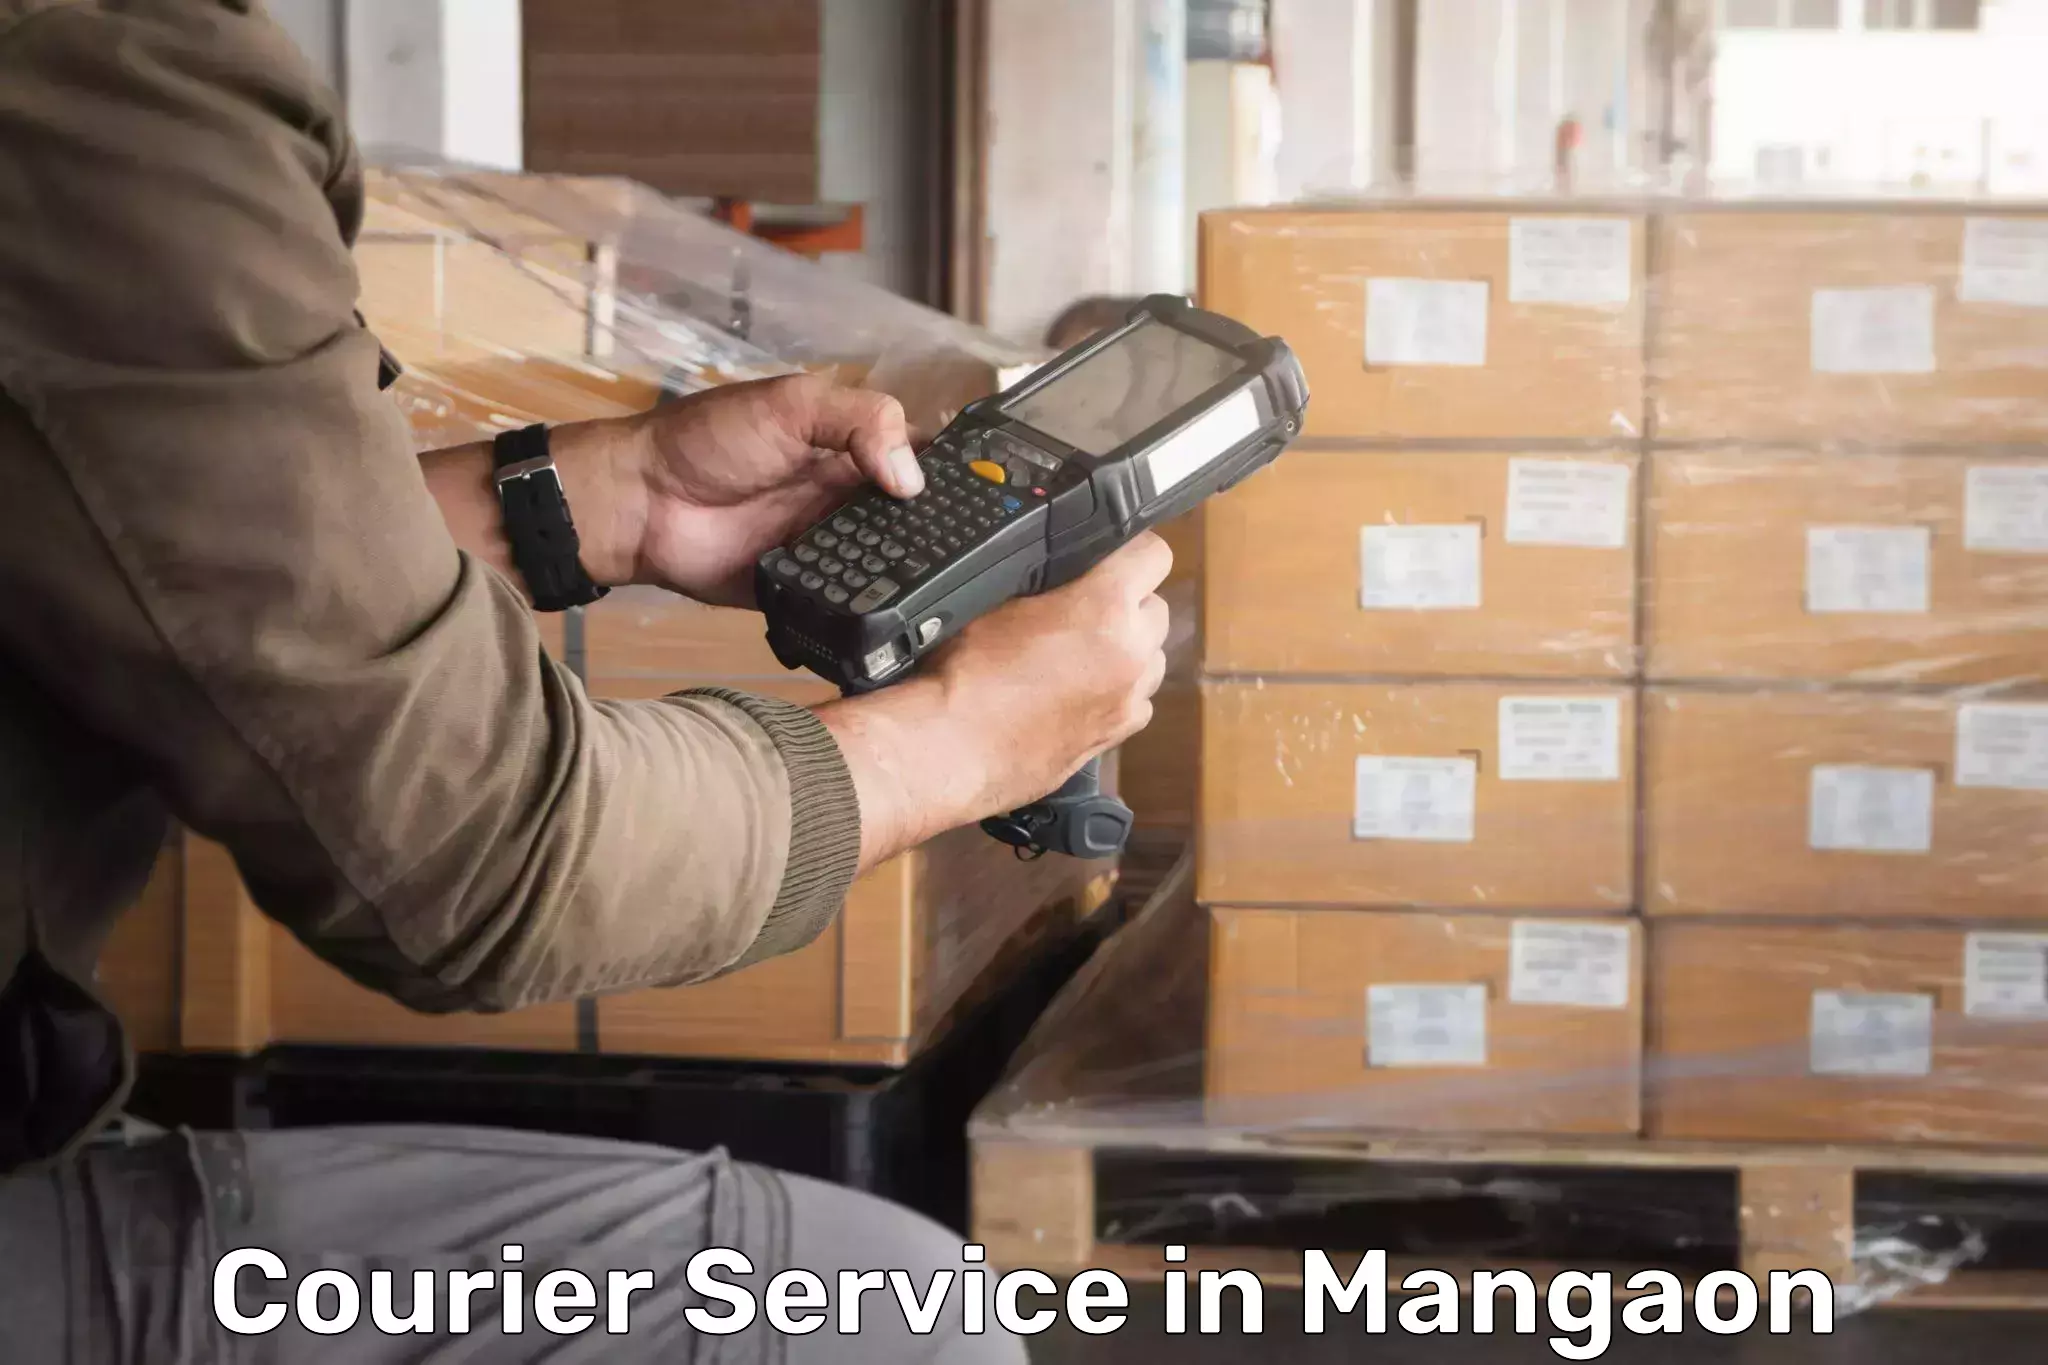 Flexible delivery scheduling in Mangaon